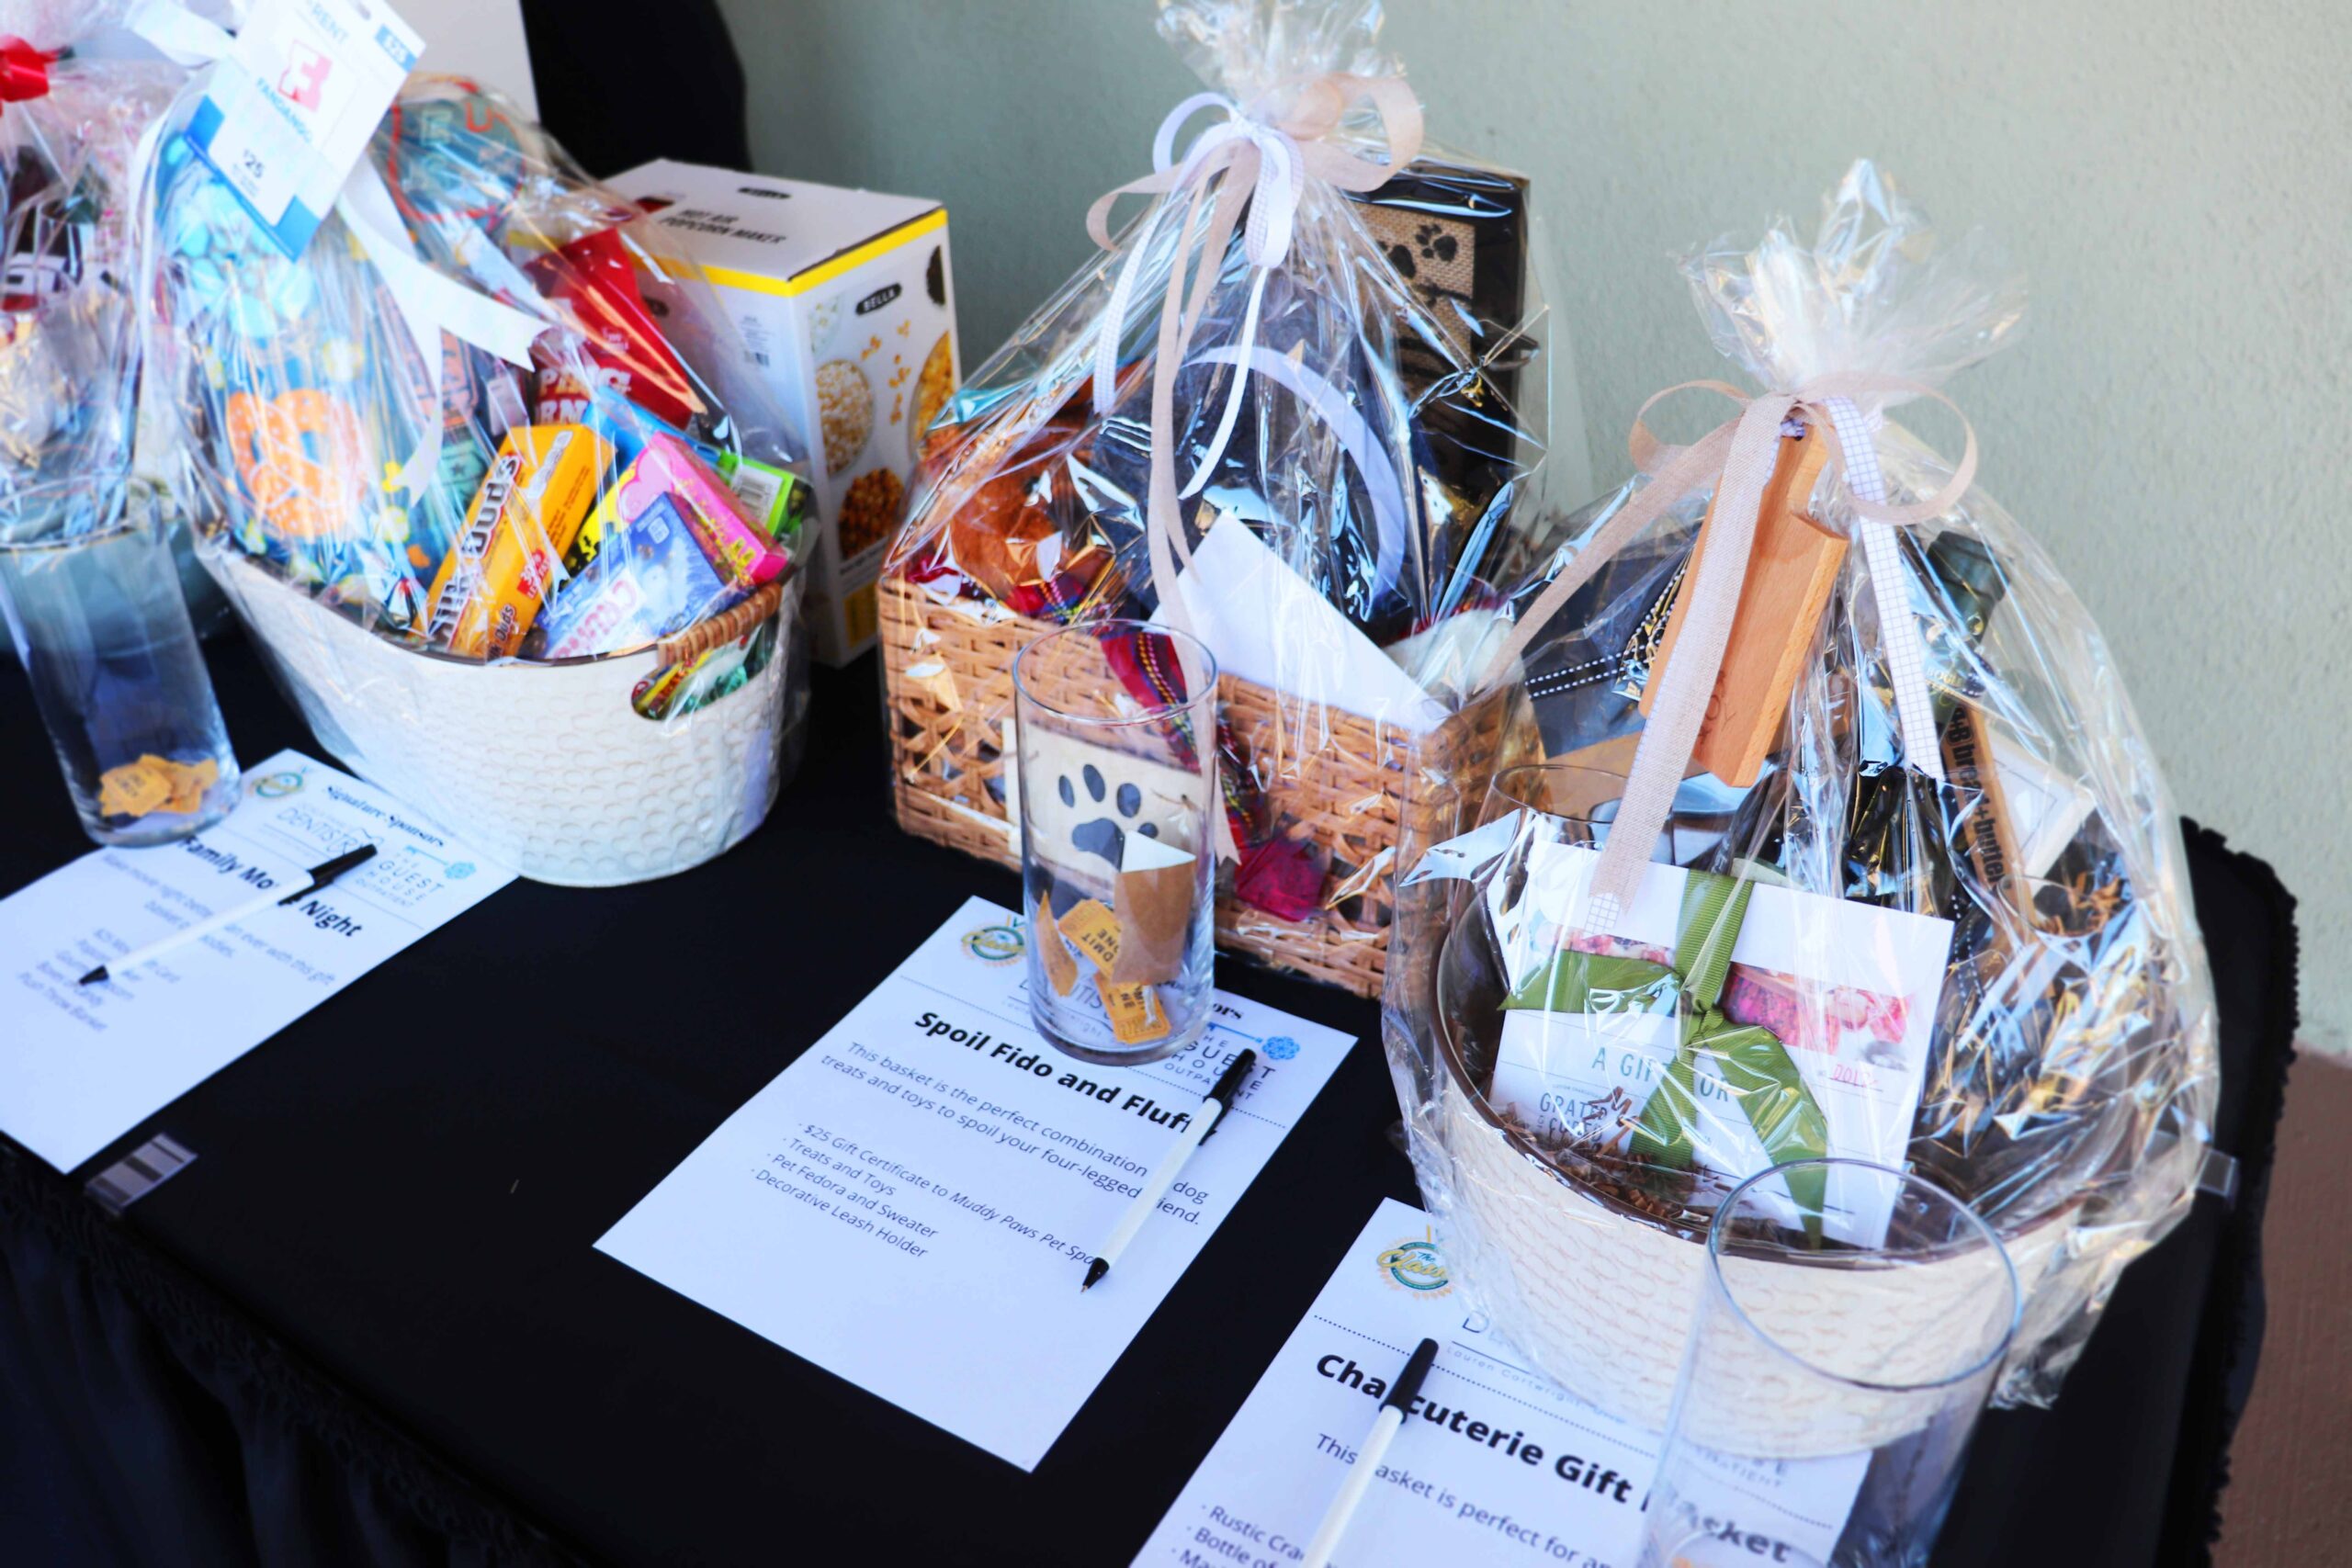 Event gift baskets ready to be won